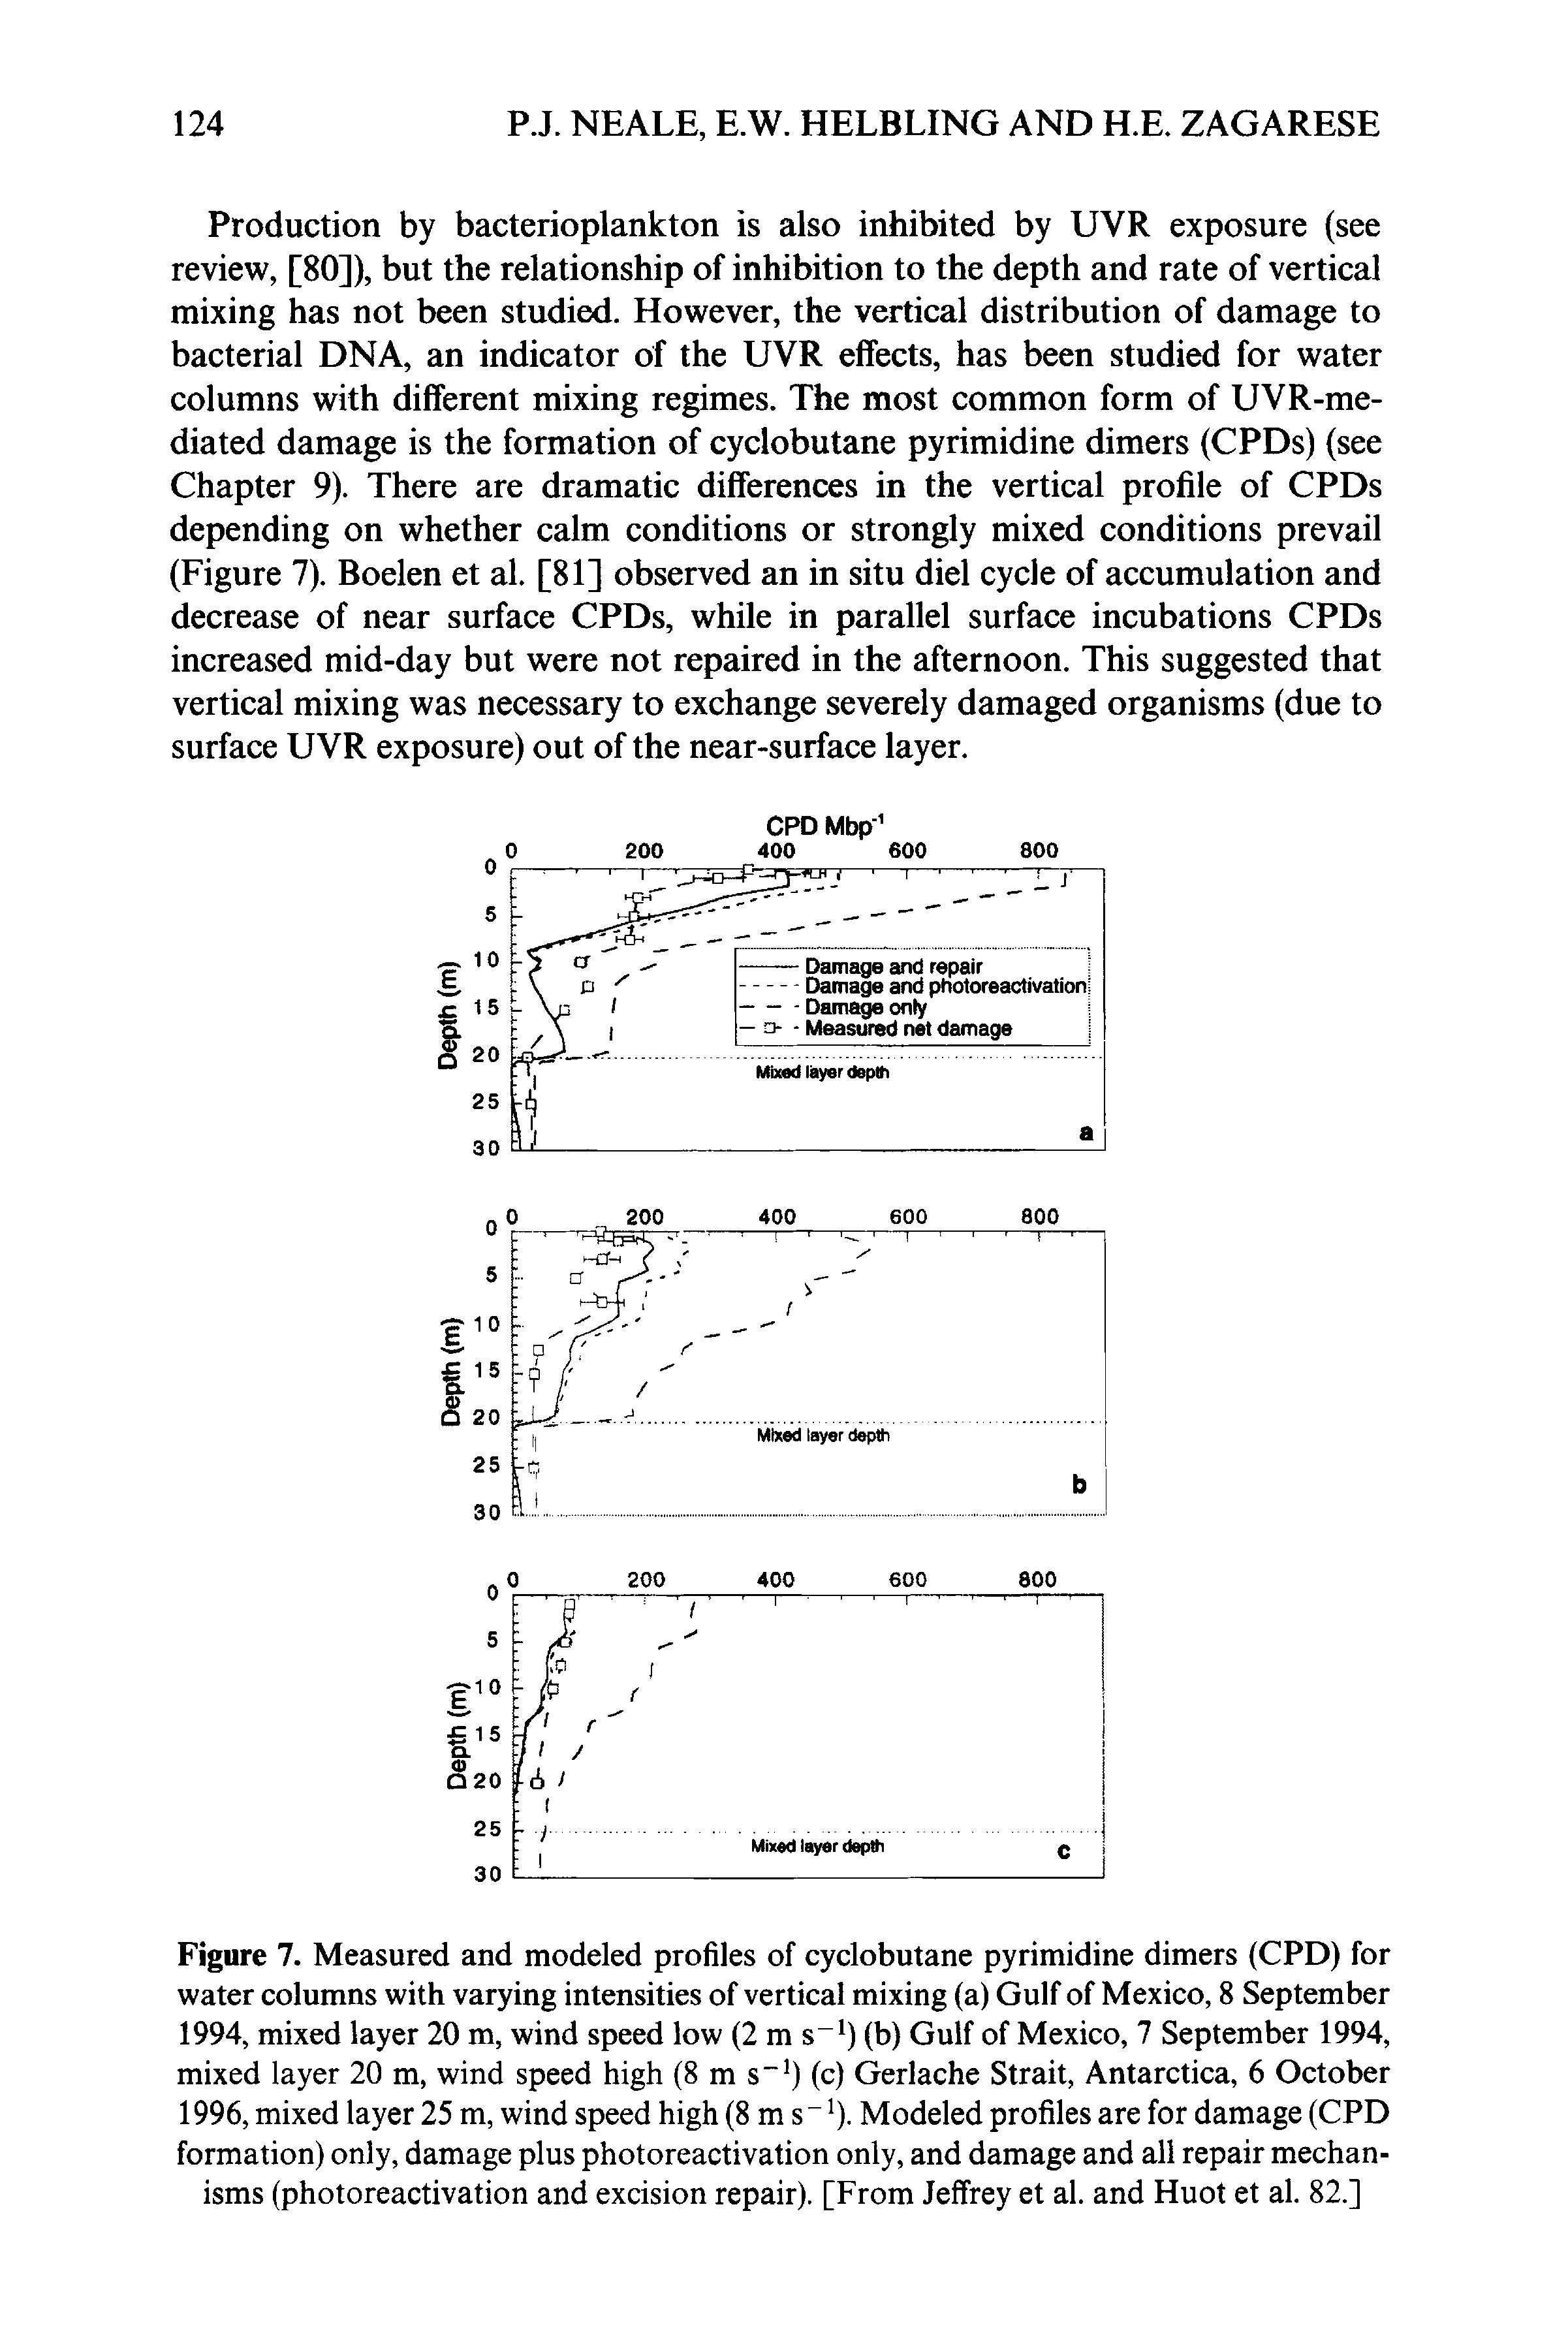 Figure 7. Measured and modeled profiles of cyclobutane pyrimidine dimers (CPD) for water columns with varying intensities of vertical mixing (a) Gulf of Mexico, 8 September 1994, mixed layer 20 m, wind speed low (2 m s ) (b) Gulf of Mexico, 7 September 1994, mixed layer 20 m, wind speed high (8 m s ) (c) Gerlache Strait, Antarctica, 6 October 1996, mixed layer 25 m, wind speed high (8 m s 0- Modeled profiles are for damage (CPD formation) only, damage plus photoreactivation only, and damage and all repair mechanisms (photoreactivation and excision repair). [From Jeffrey et al. and Huot et al. 82.]...